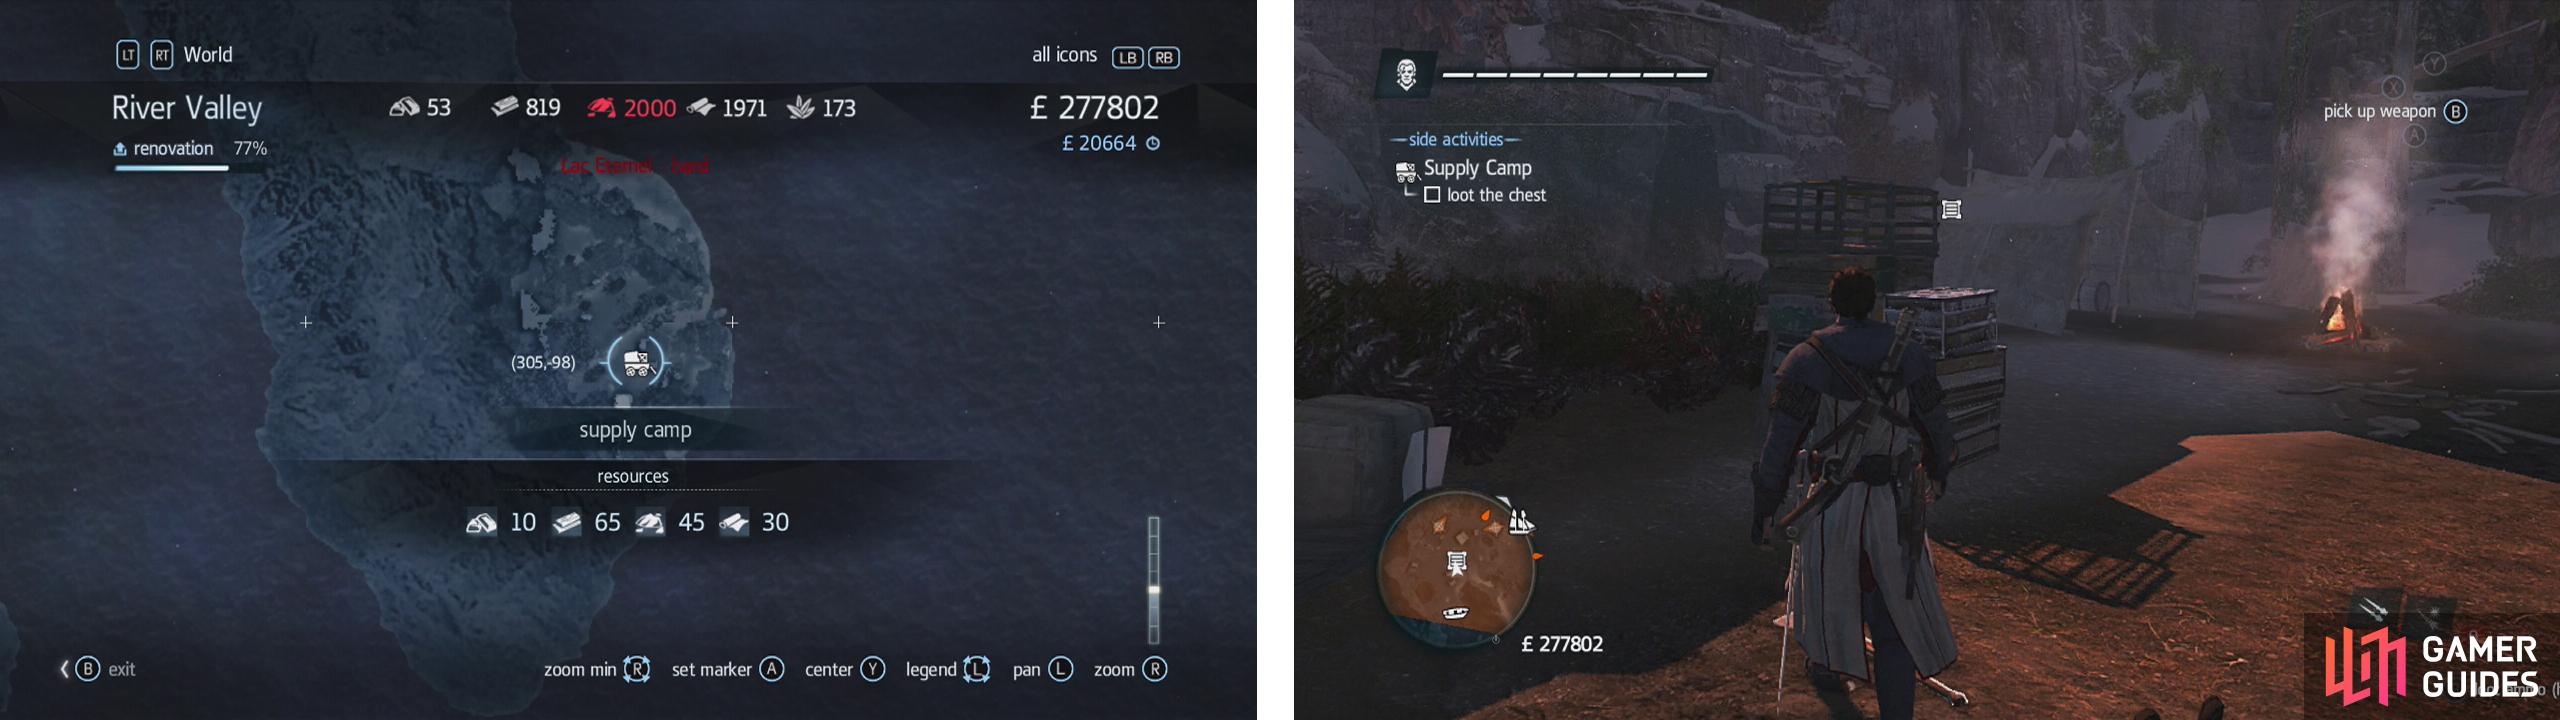 The icon for Supply Camps on the map (left) and an example of the marked crate we need to loot in-game (right).